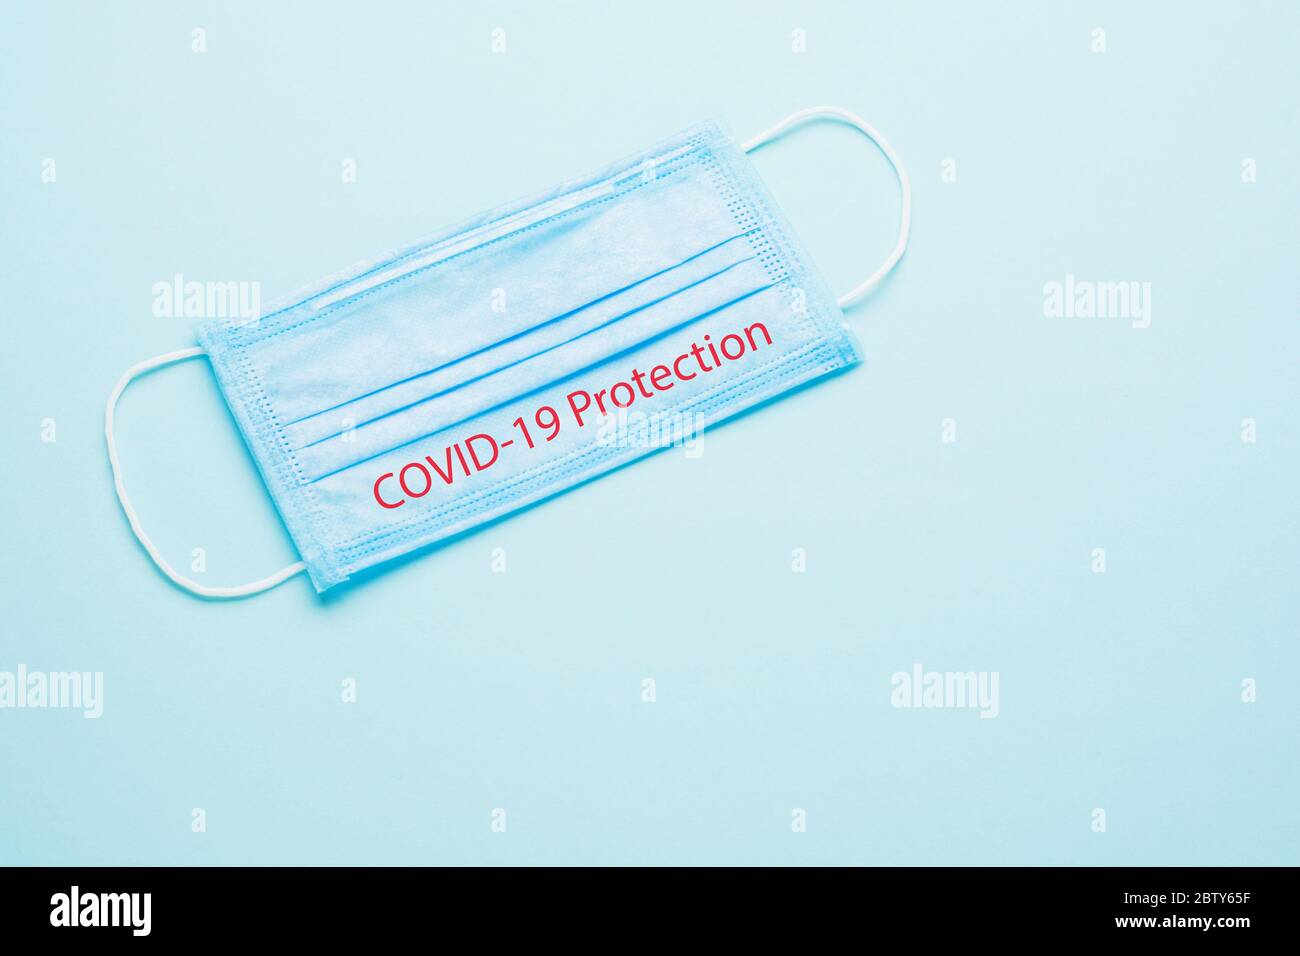 Blue Medical Disposable Face Mask with covid-19 printed on it. Coronavirus pneumonia gets official name from WHO: COVID-19. Disposable breath filter Stock Photo